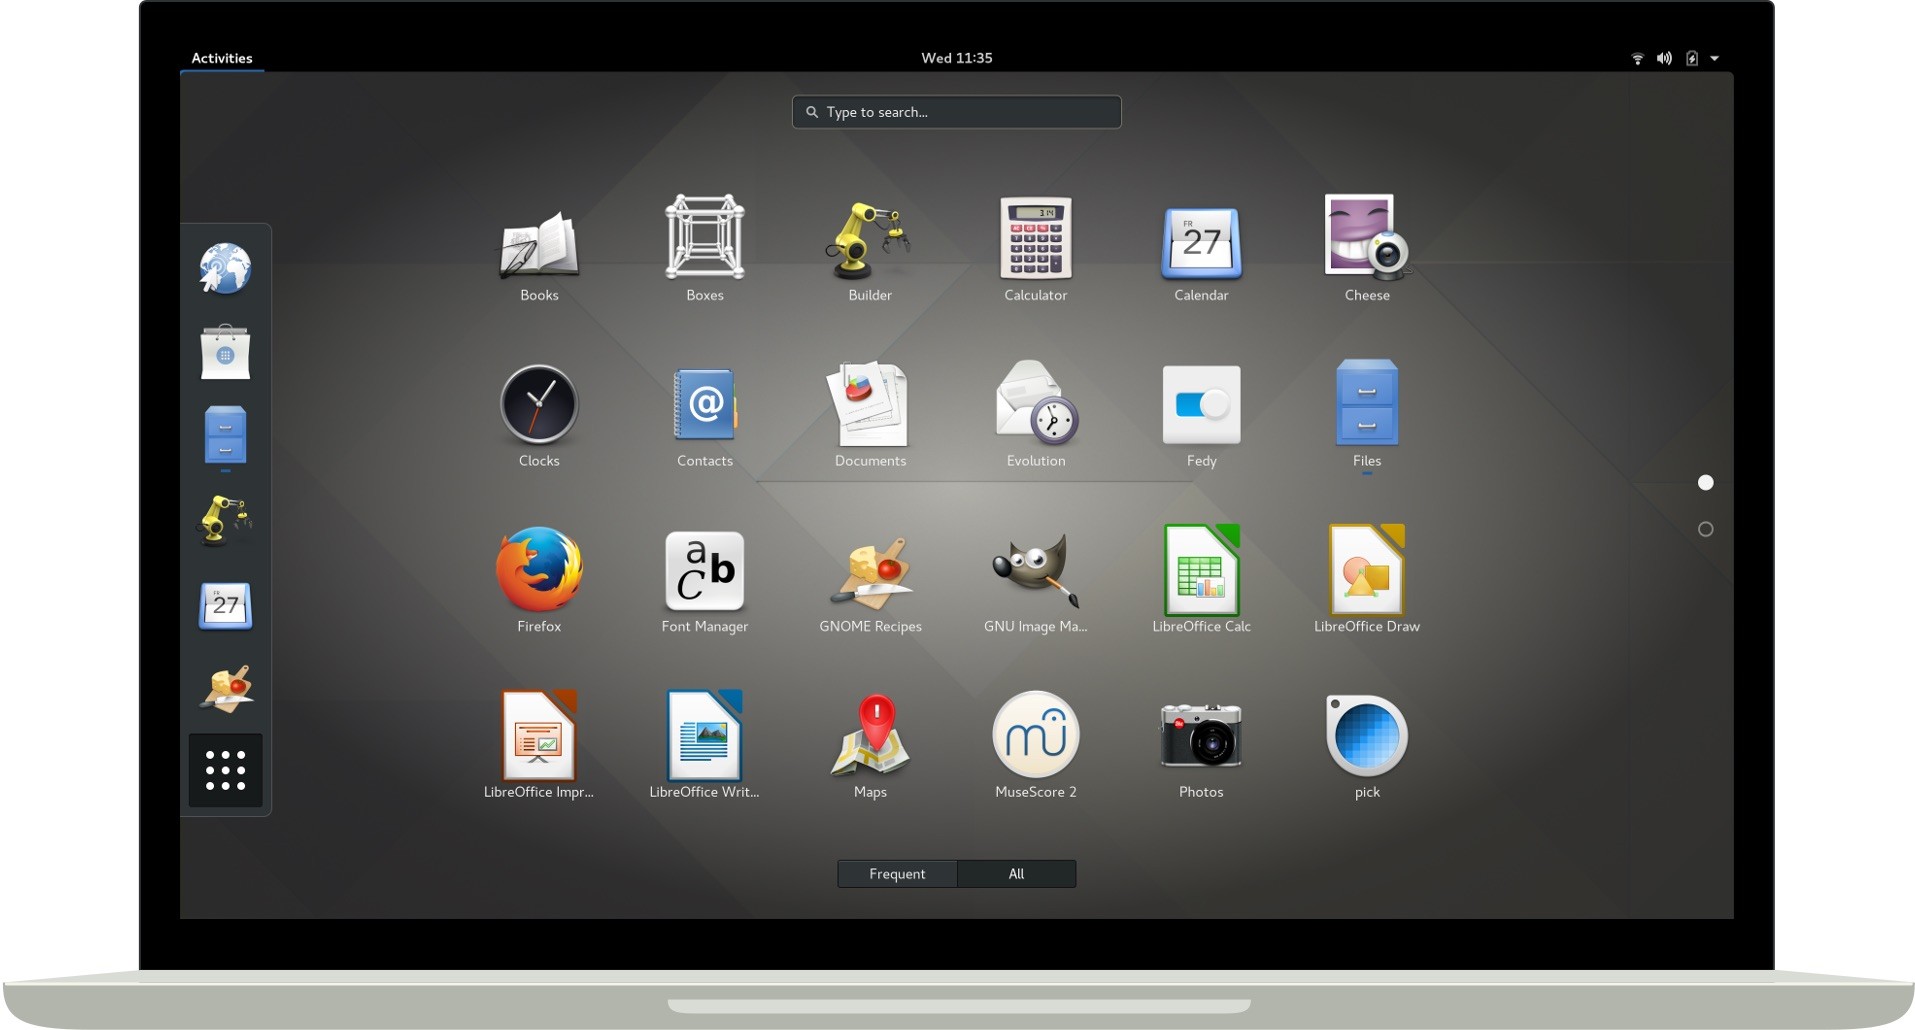 gnome-3-28-desktop-environment-officially-released-here-s-what-s-new-520231-2.jpg